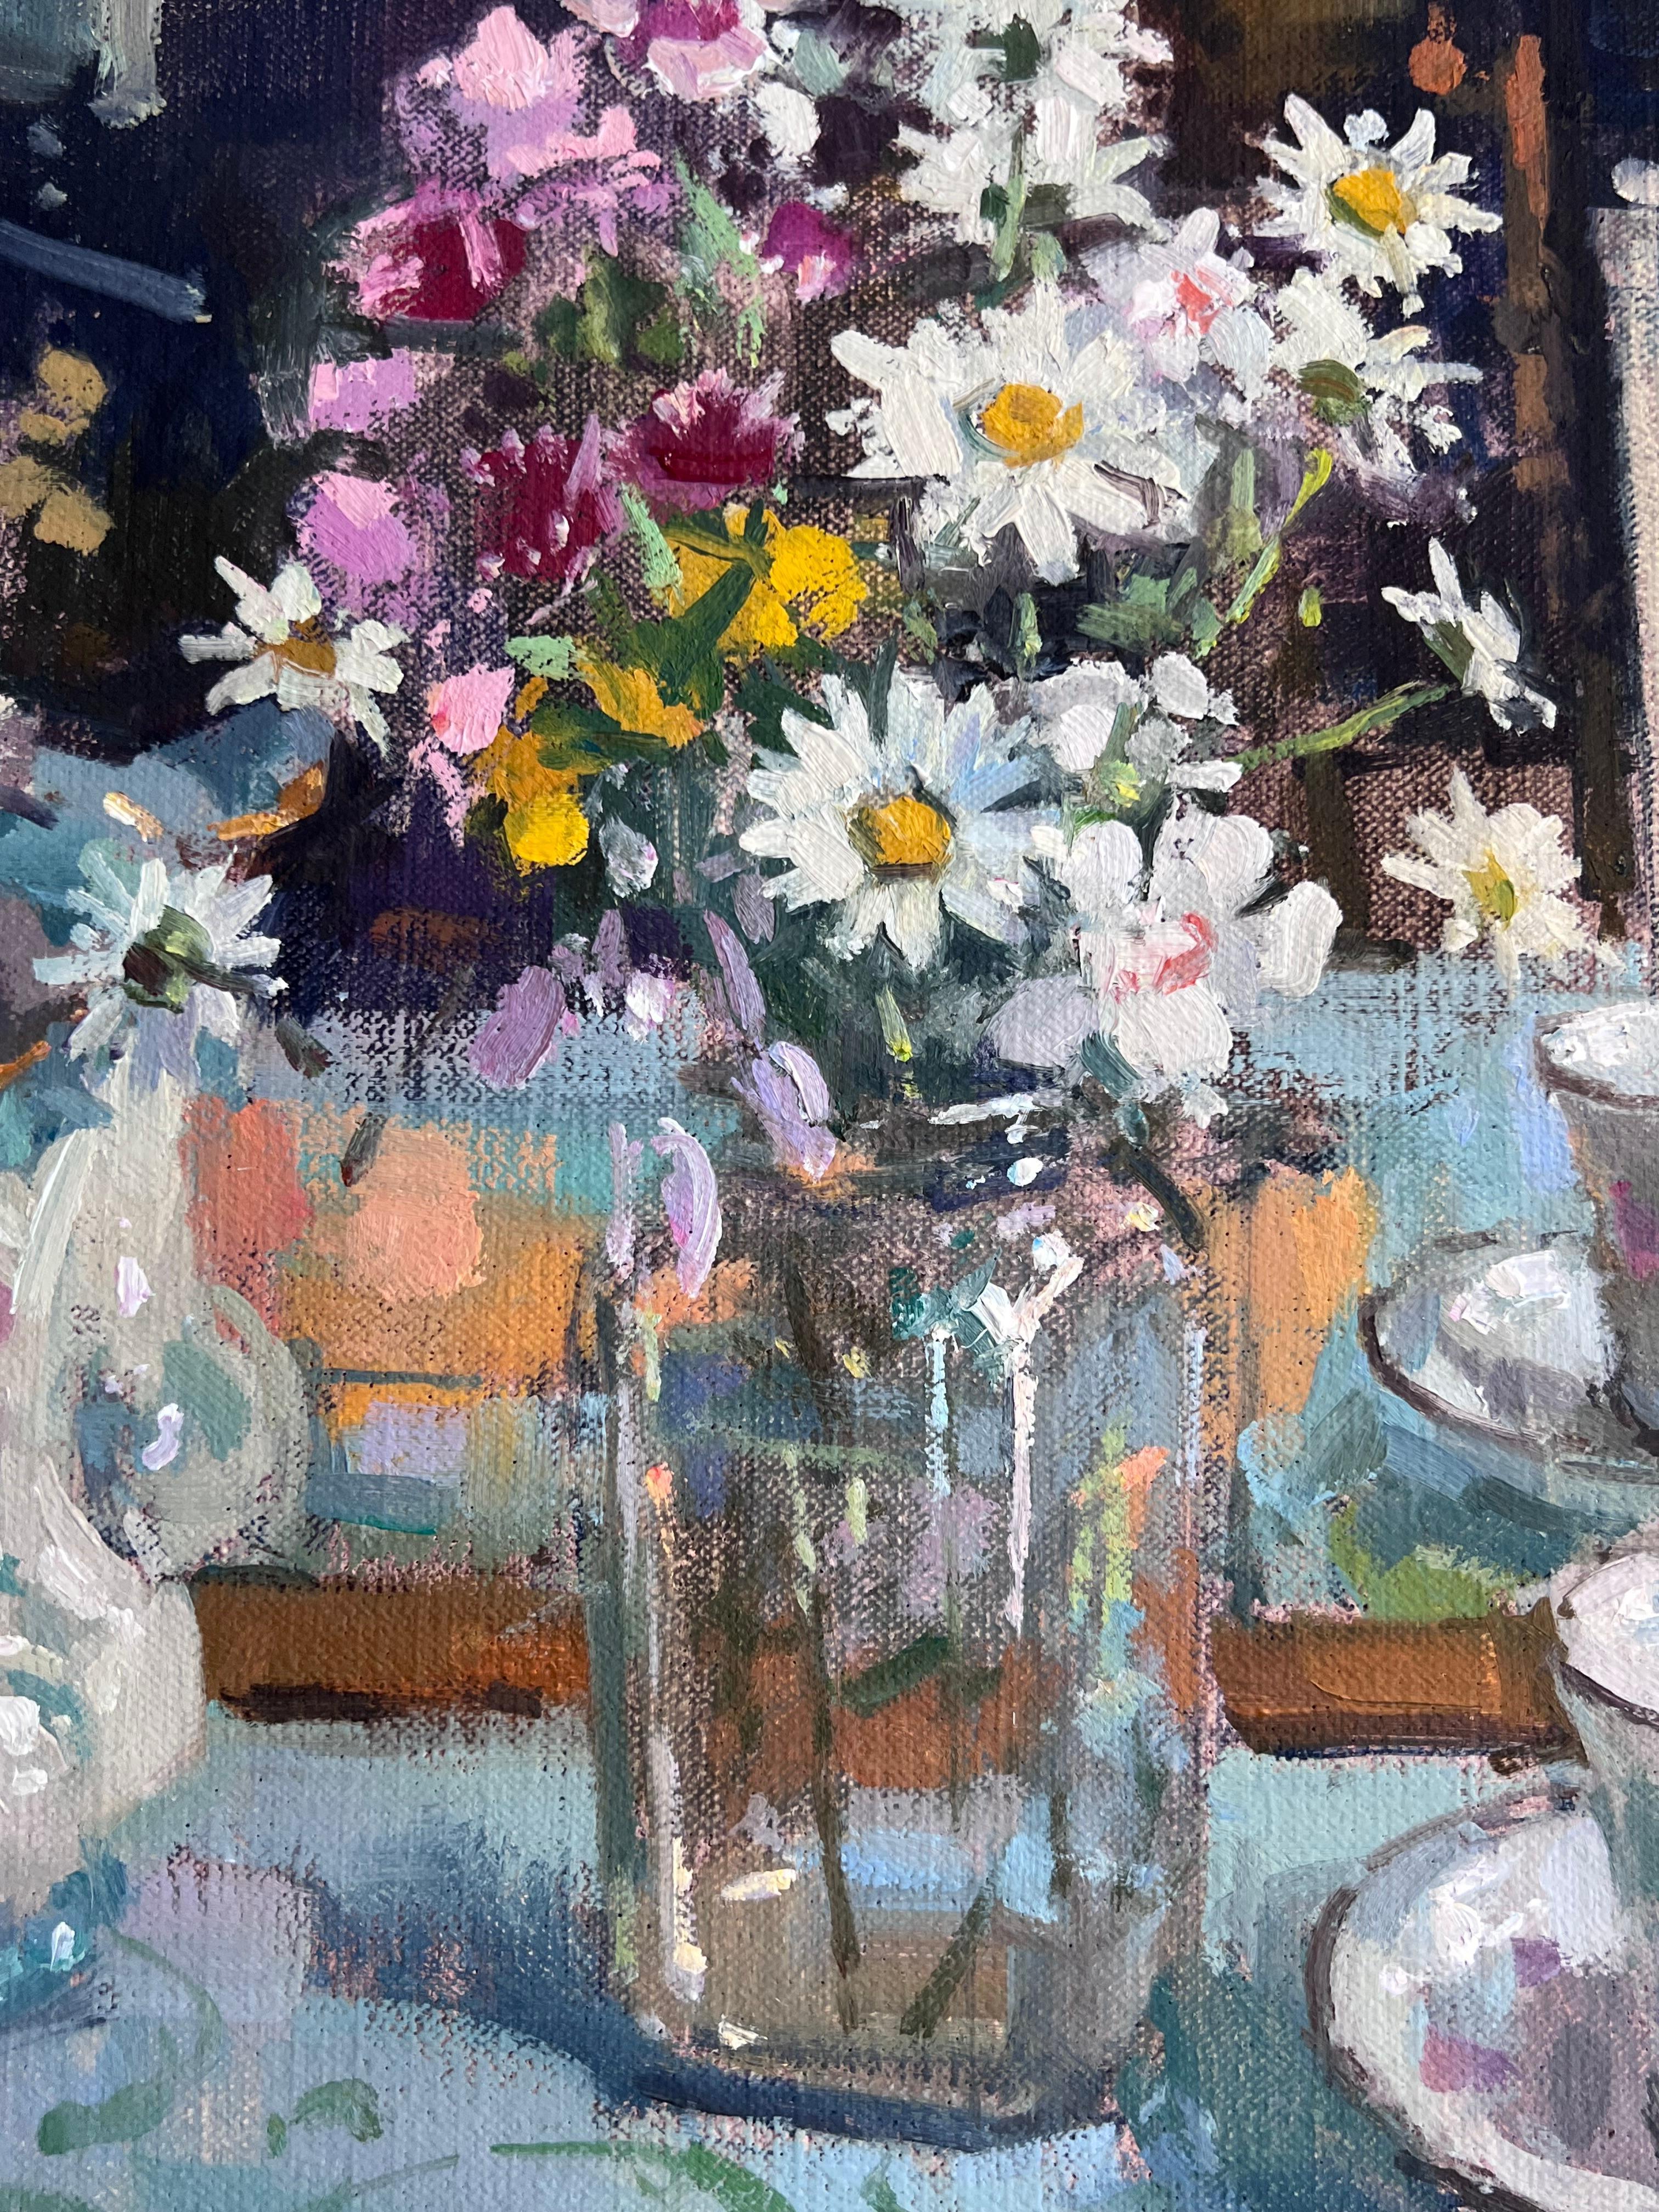 Summer Flowers - original floral impressionist oil painting- contemporary art - Impressionist Painting by John D Martin RBA